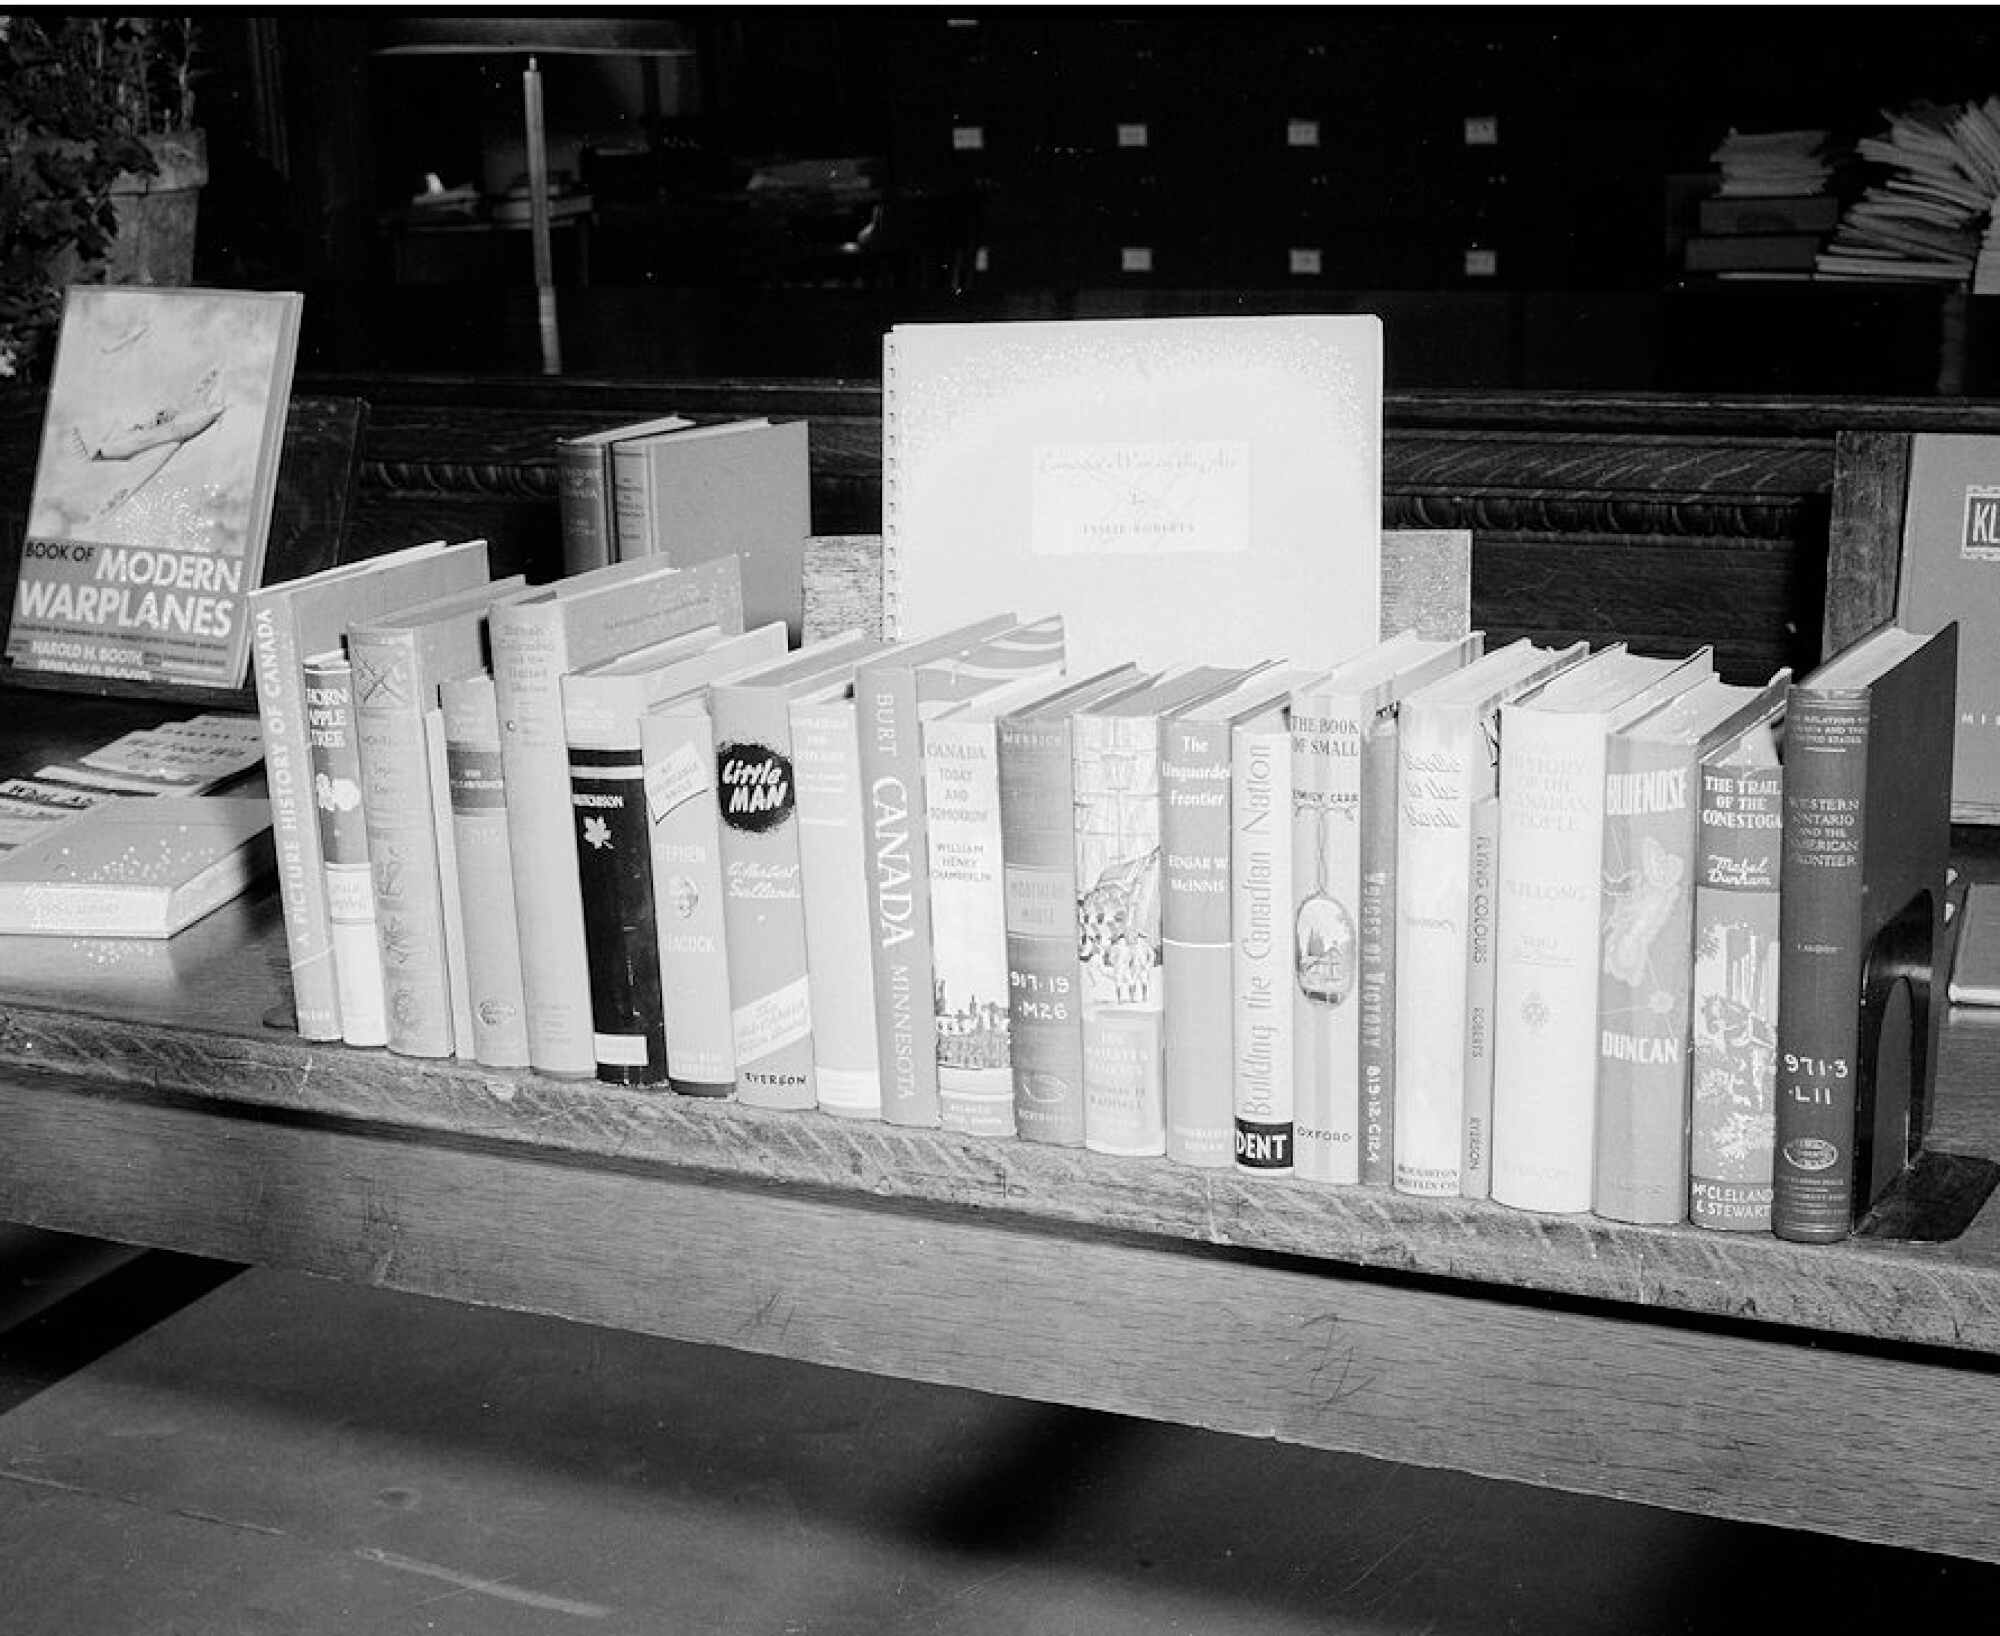 A black and white photograph of a row of books standing upright on a wooden table.